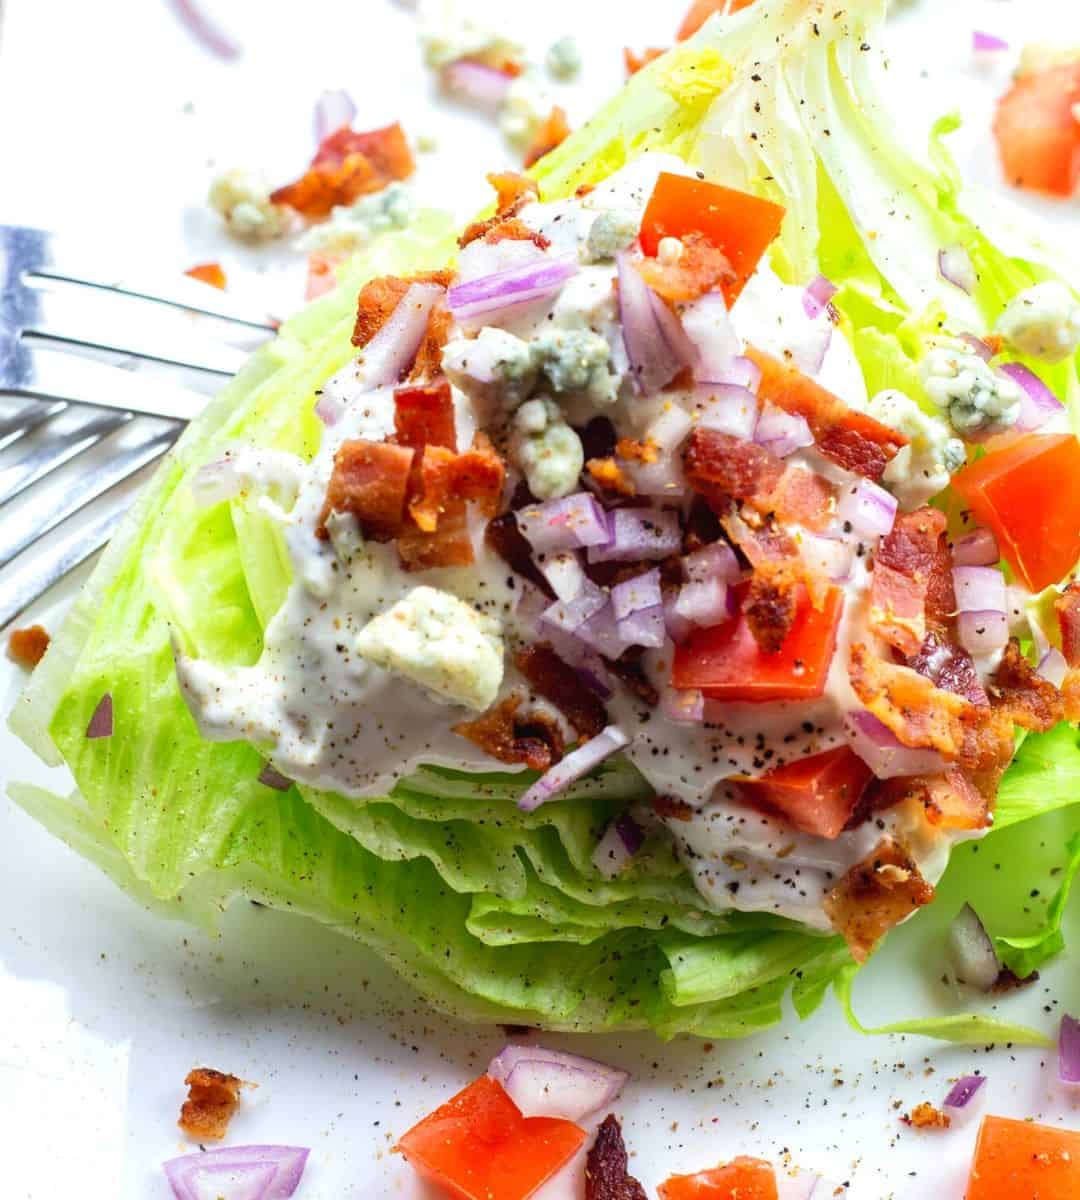 A delicious iceberg lettuce salad topped with bacon, tomatoes and blue cheese.